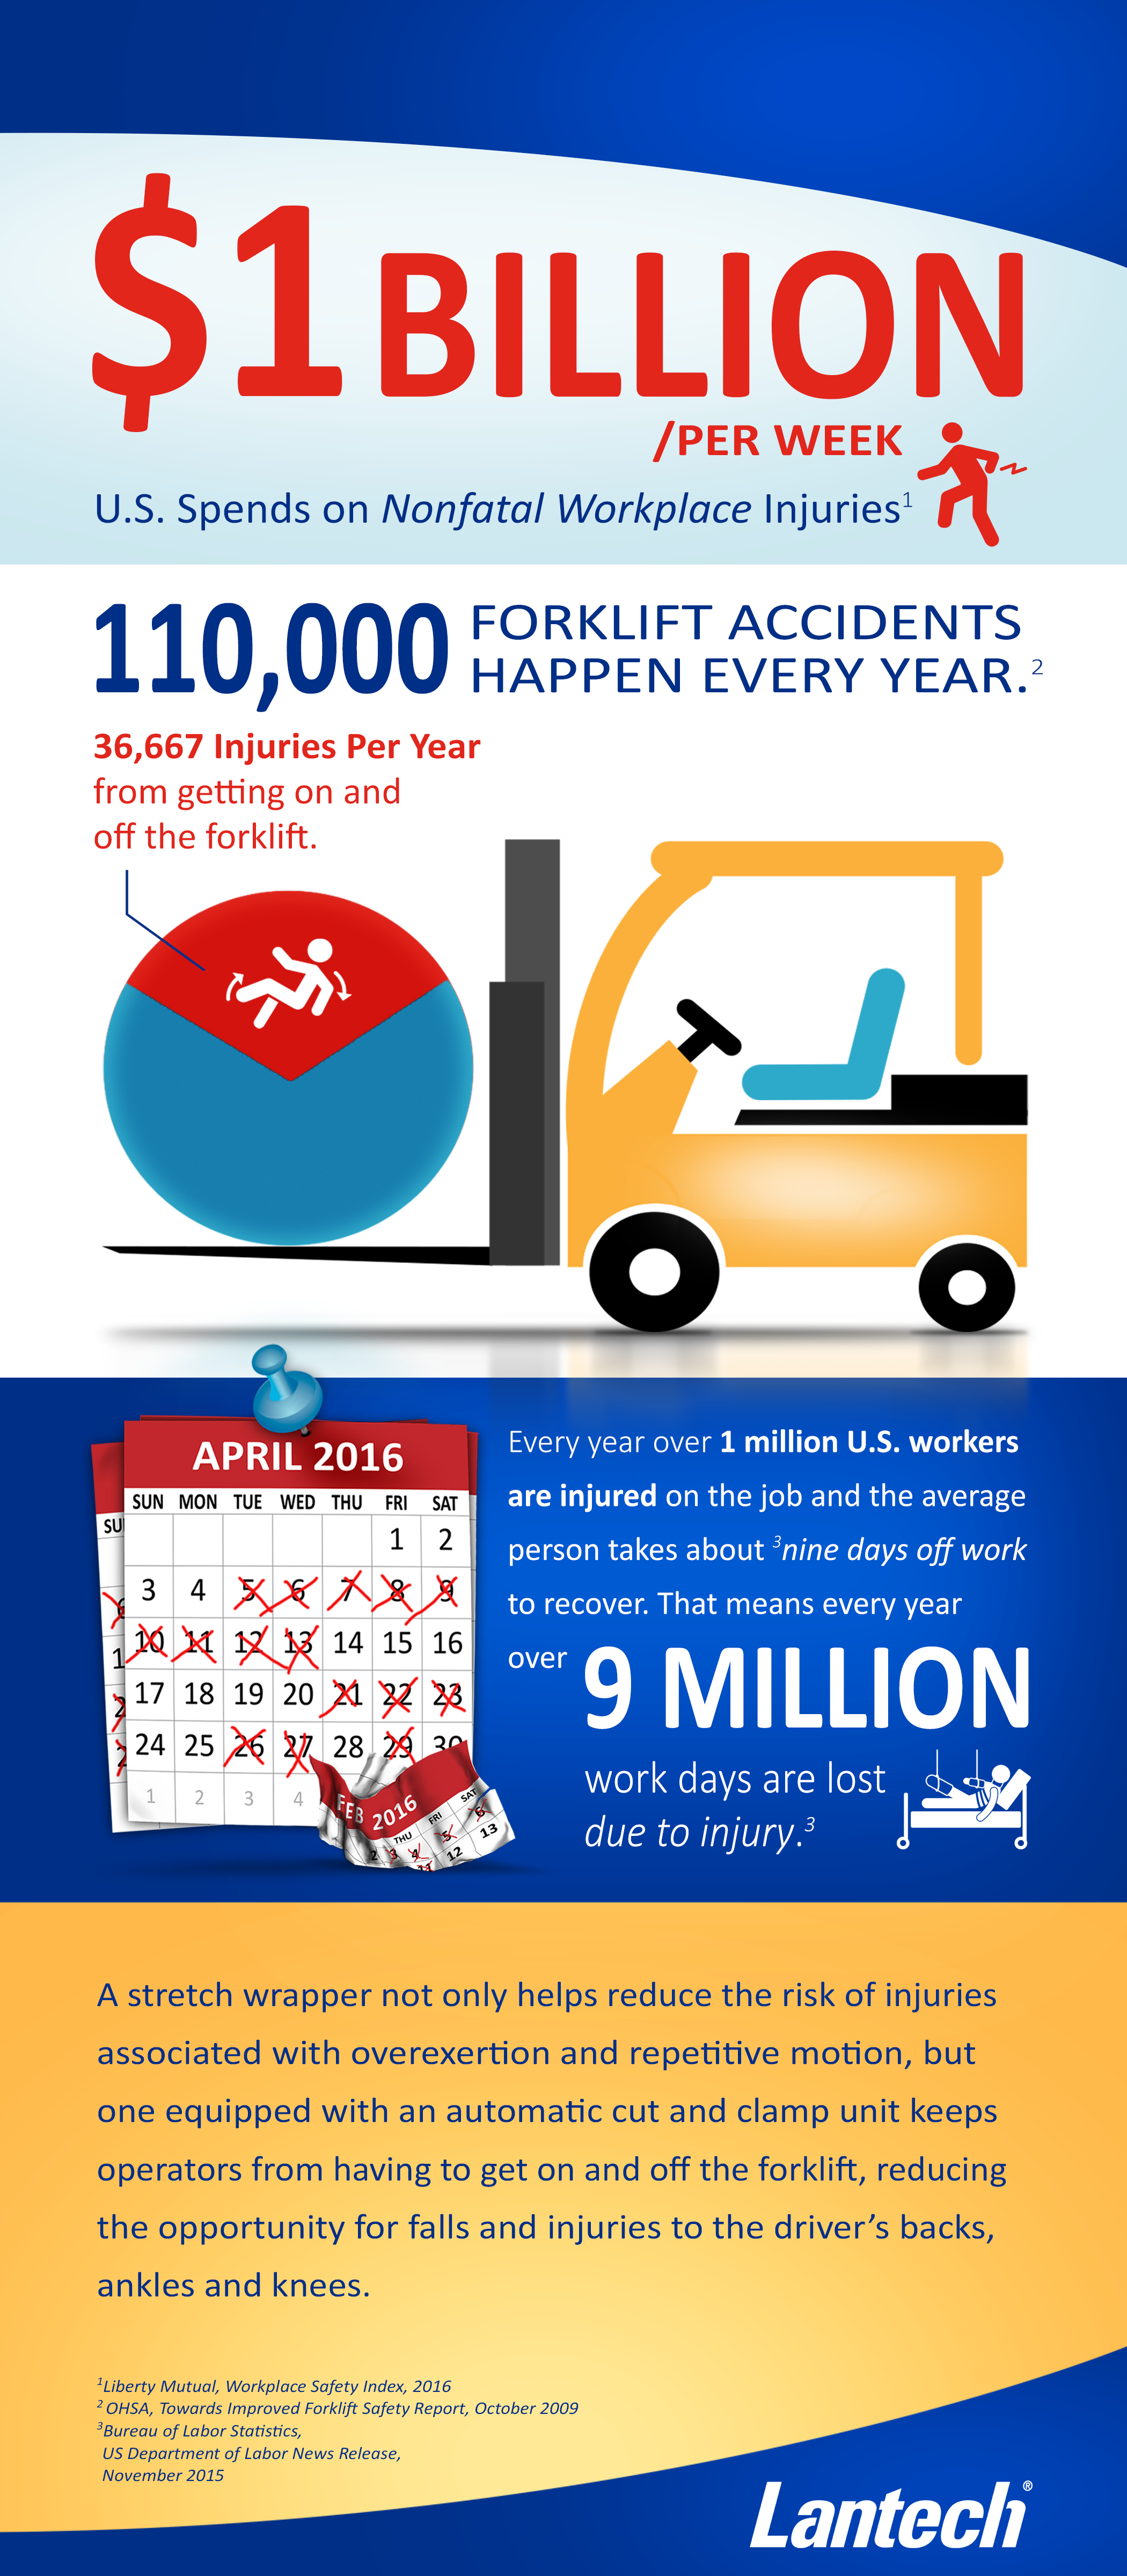 Forklift Safety Infographic from Lantech